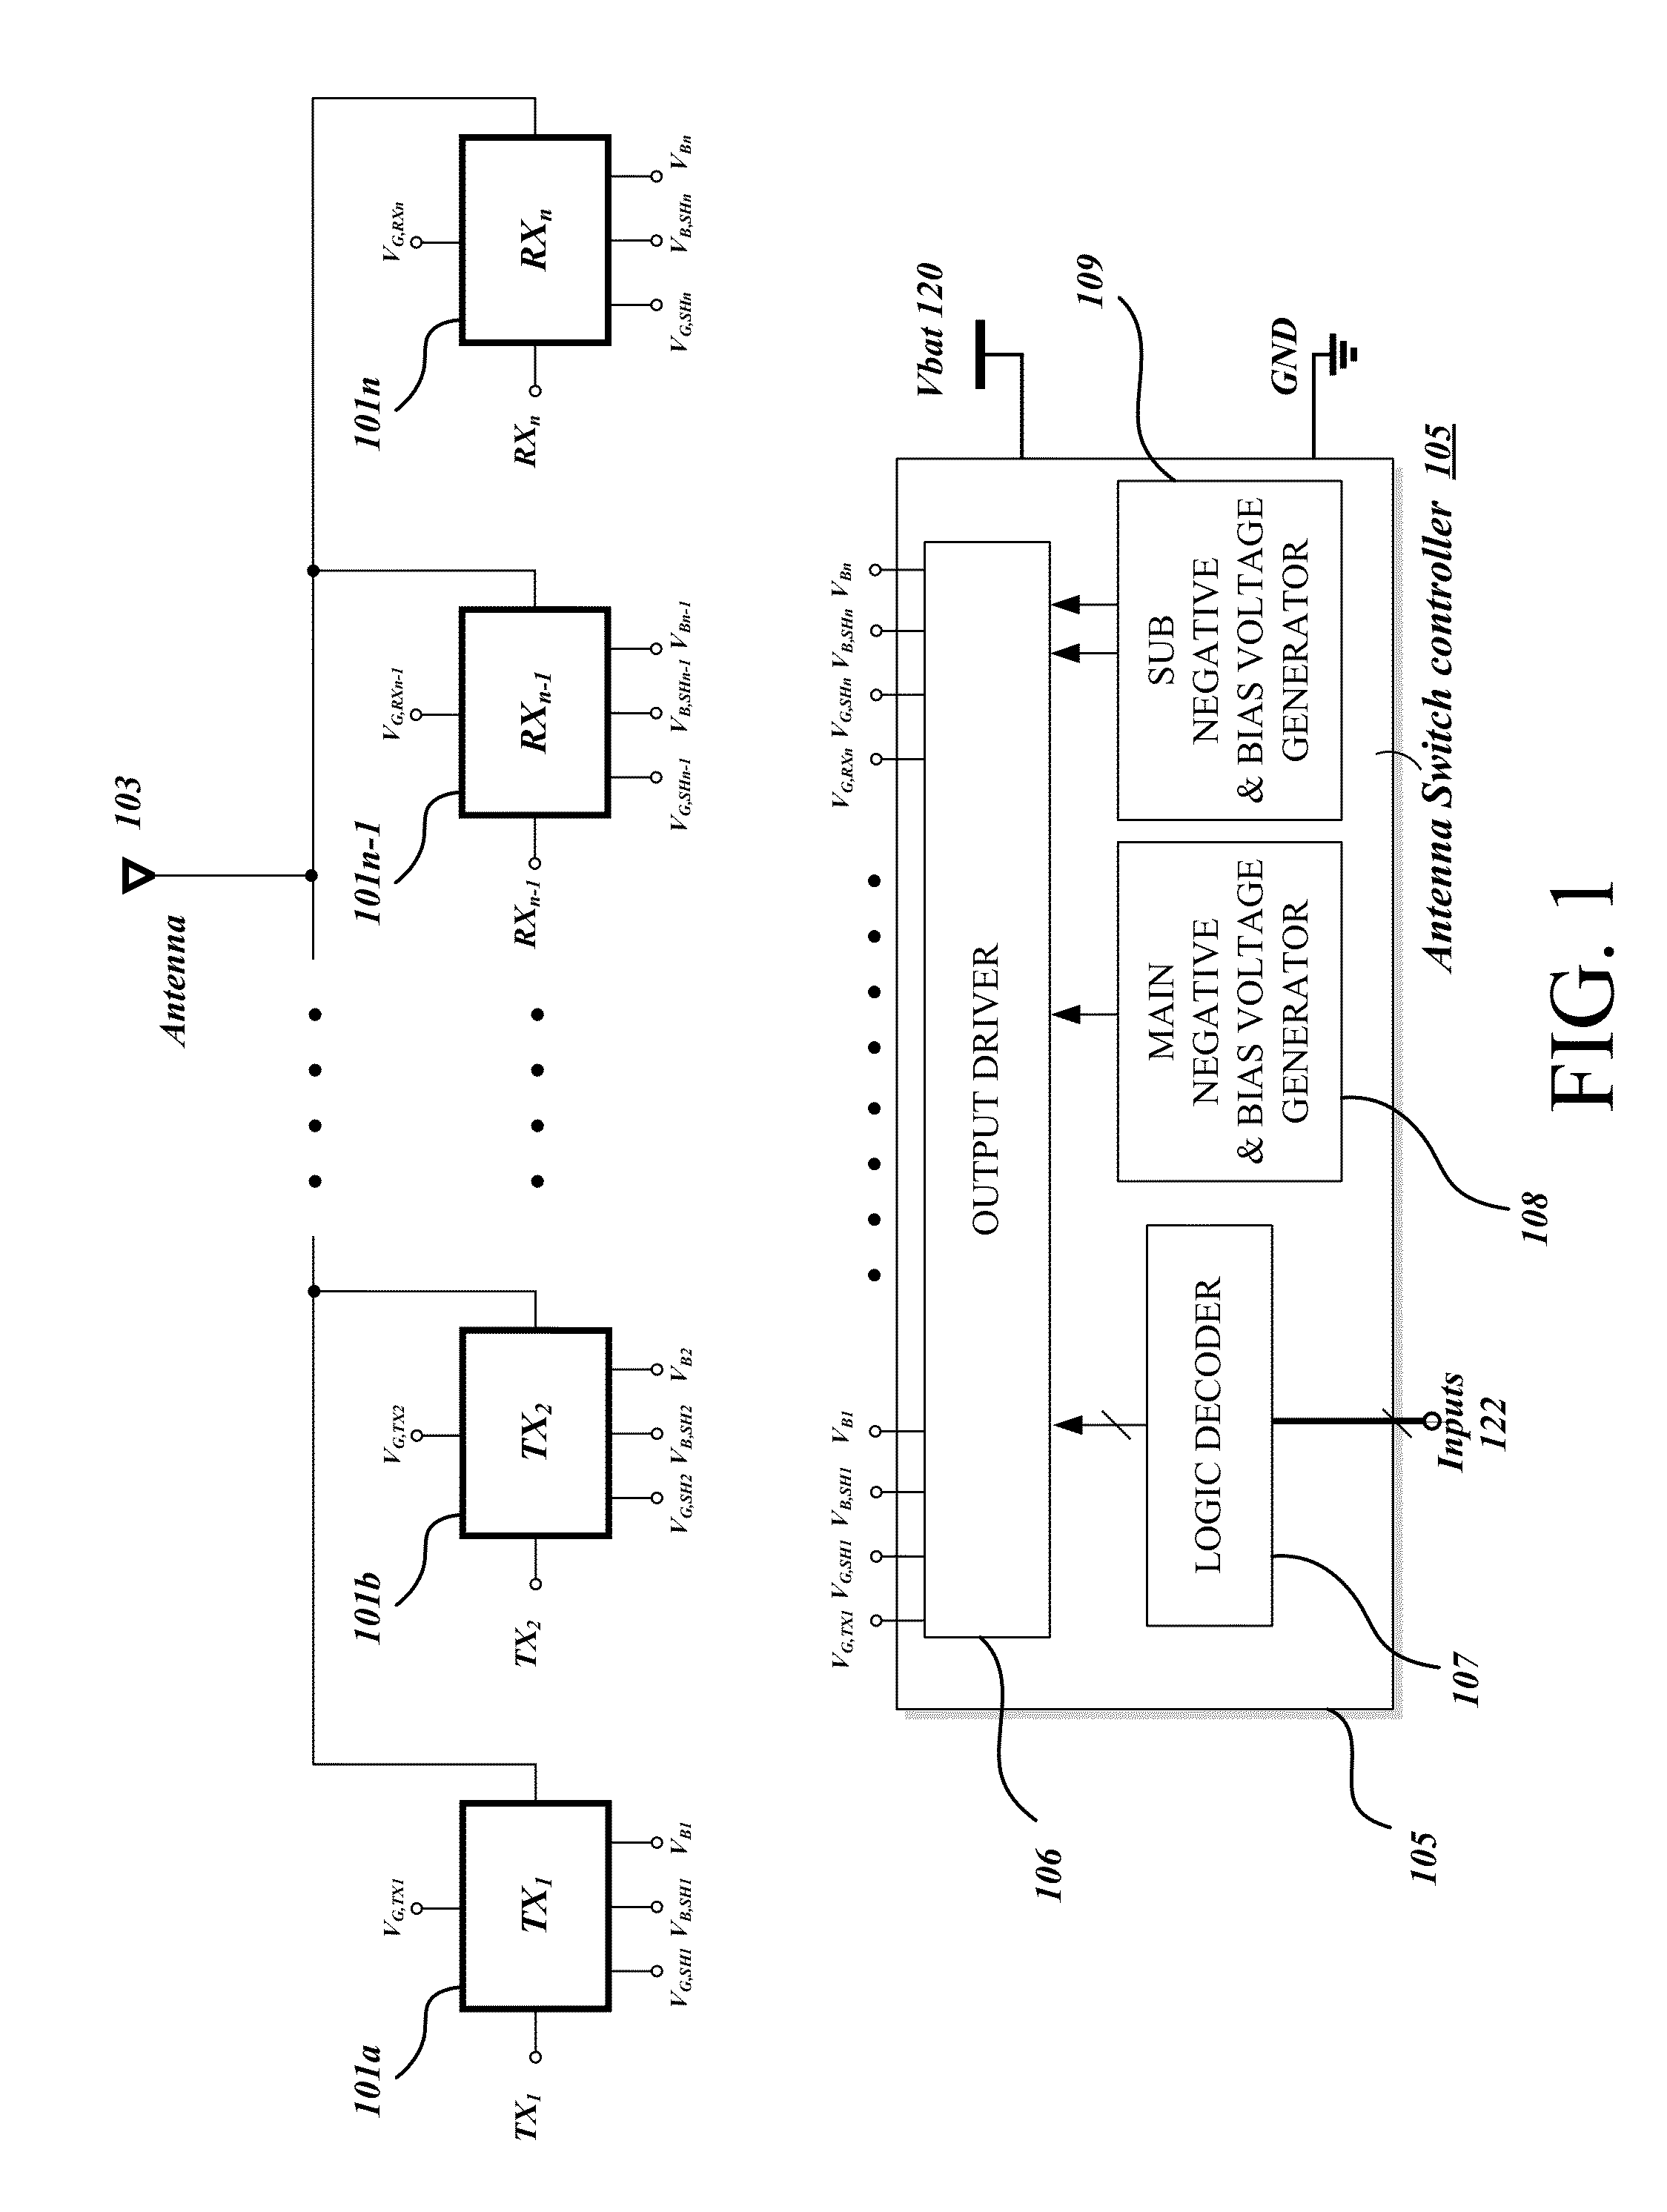 Systems, Methods, and Apparatuses for Negative-Charge-Pump-Based Antenna Switch Controllers Utilizing Battery Supplies